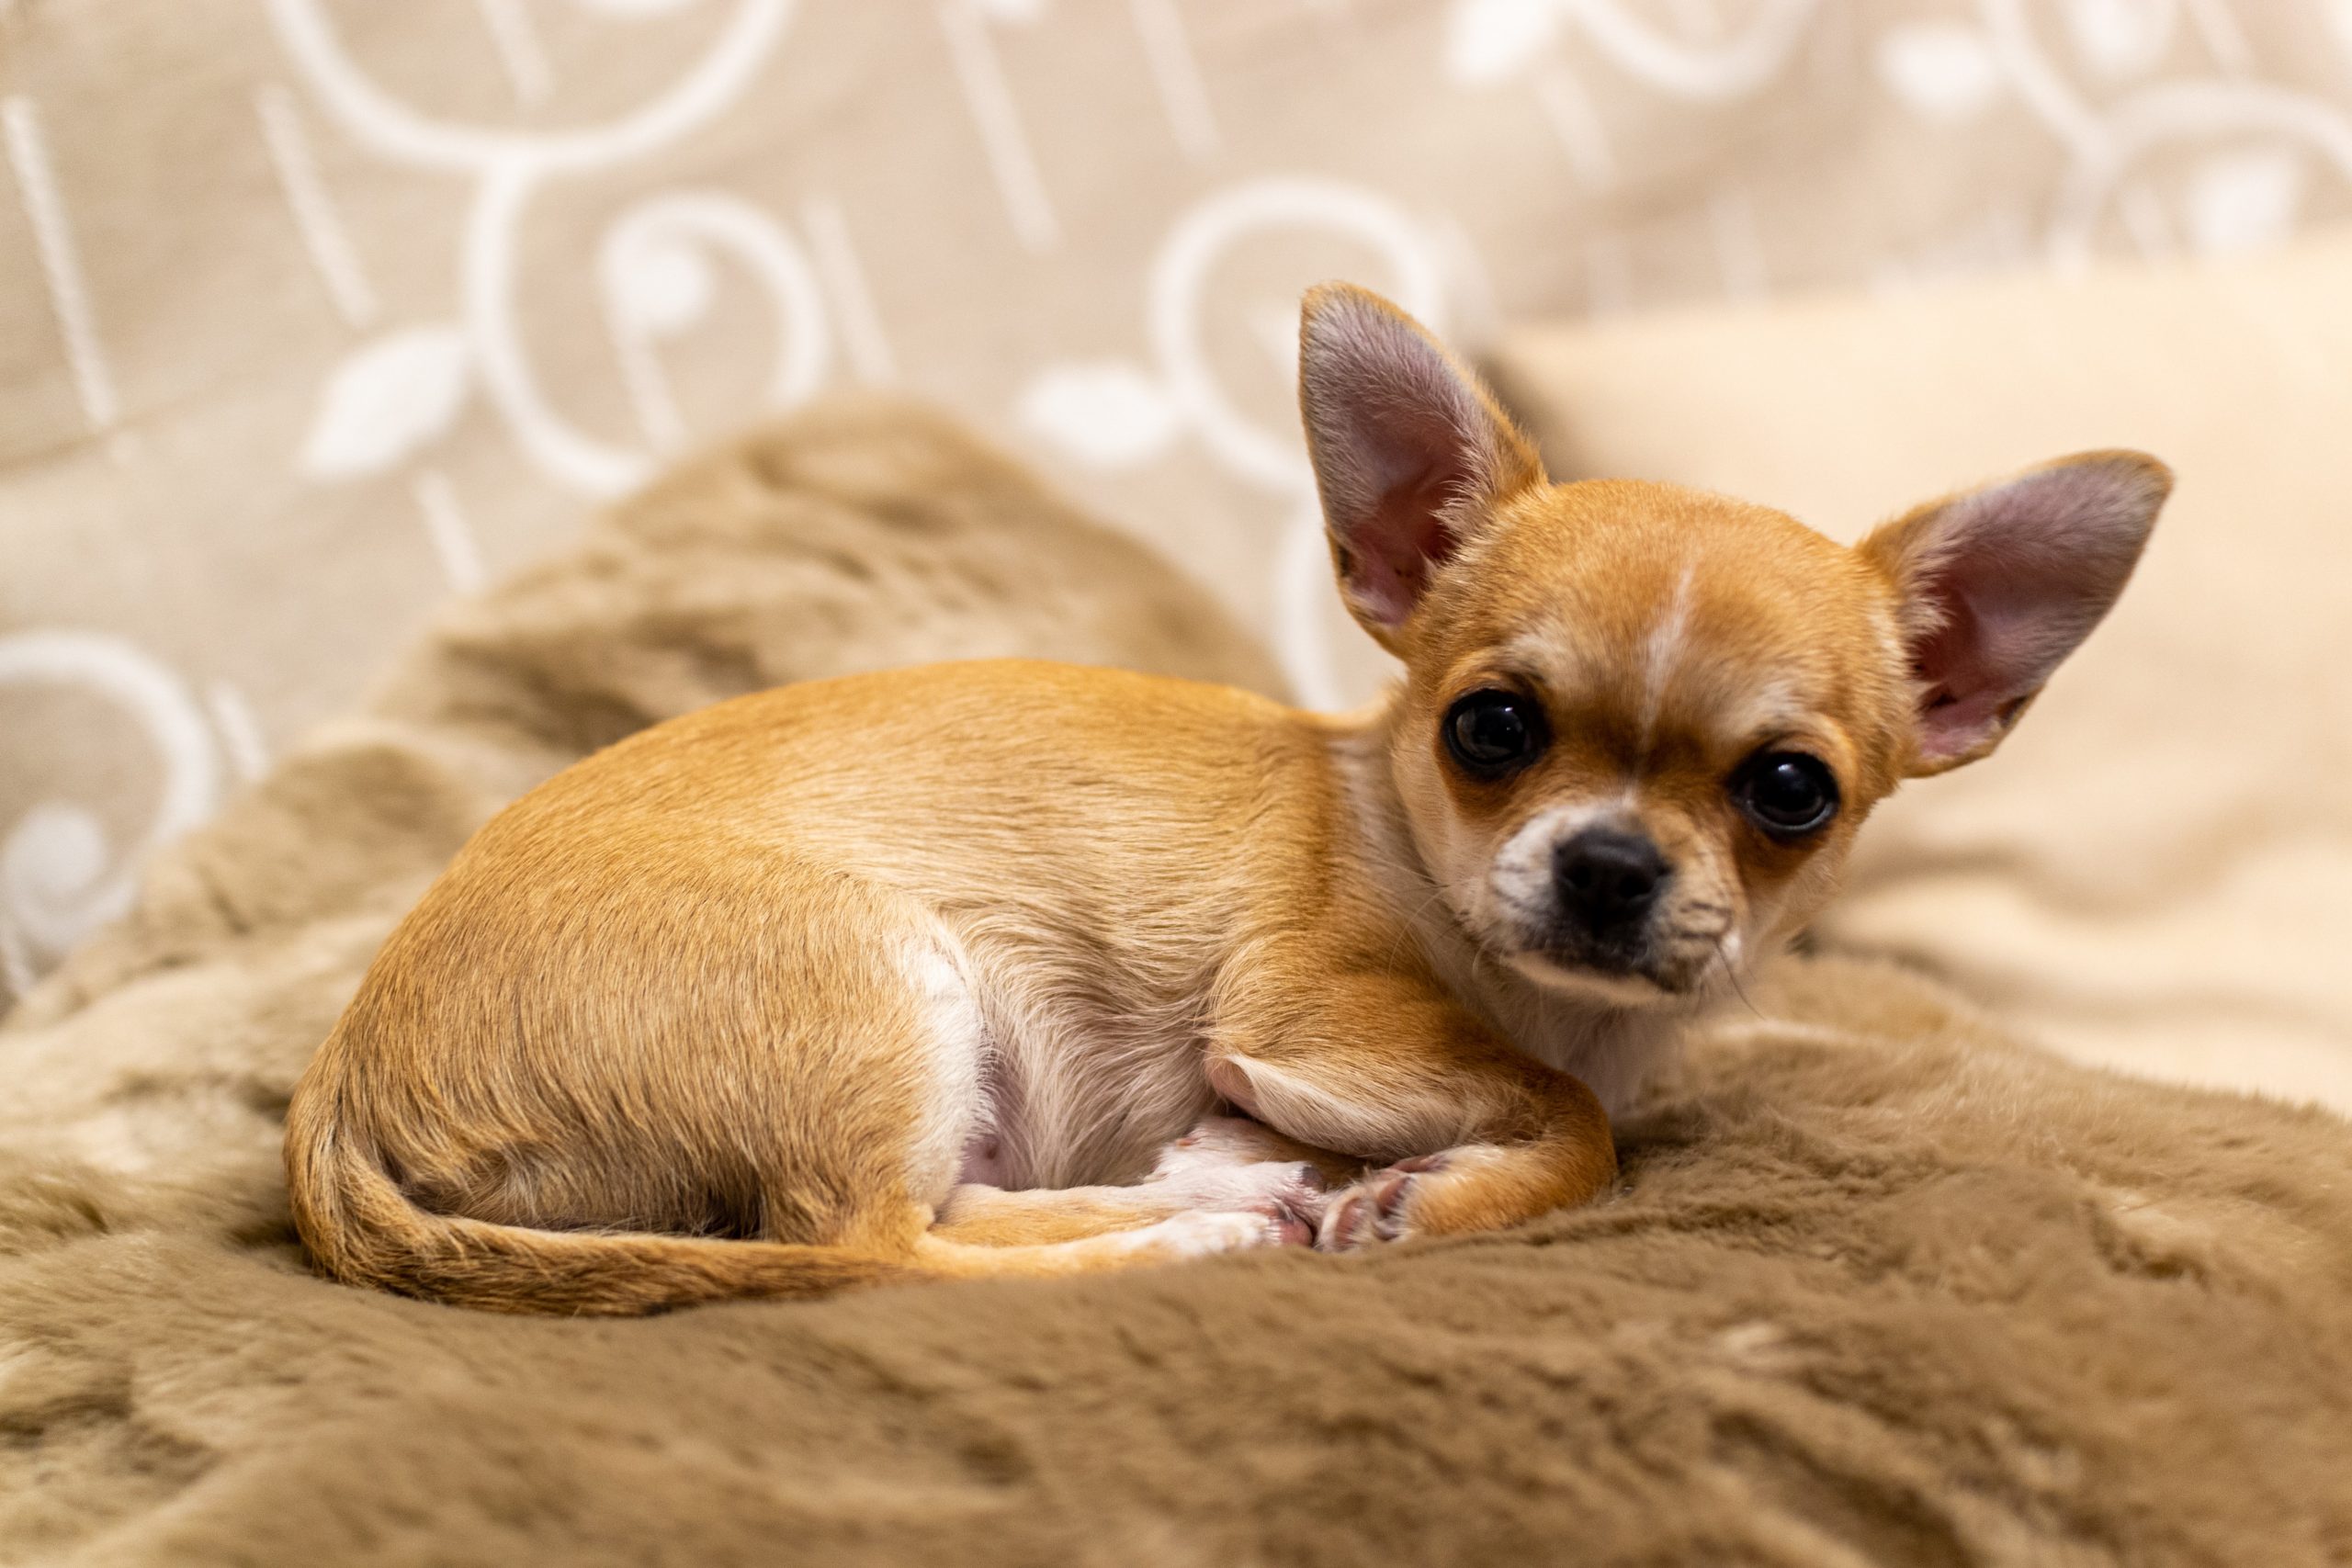 The Chihuahua ( dog breed ) - online puzzle